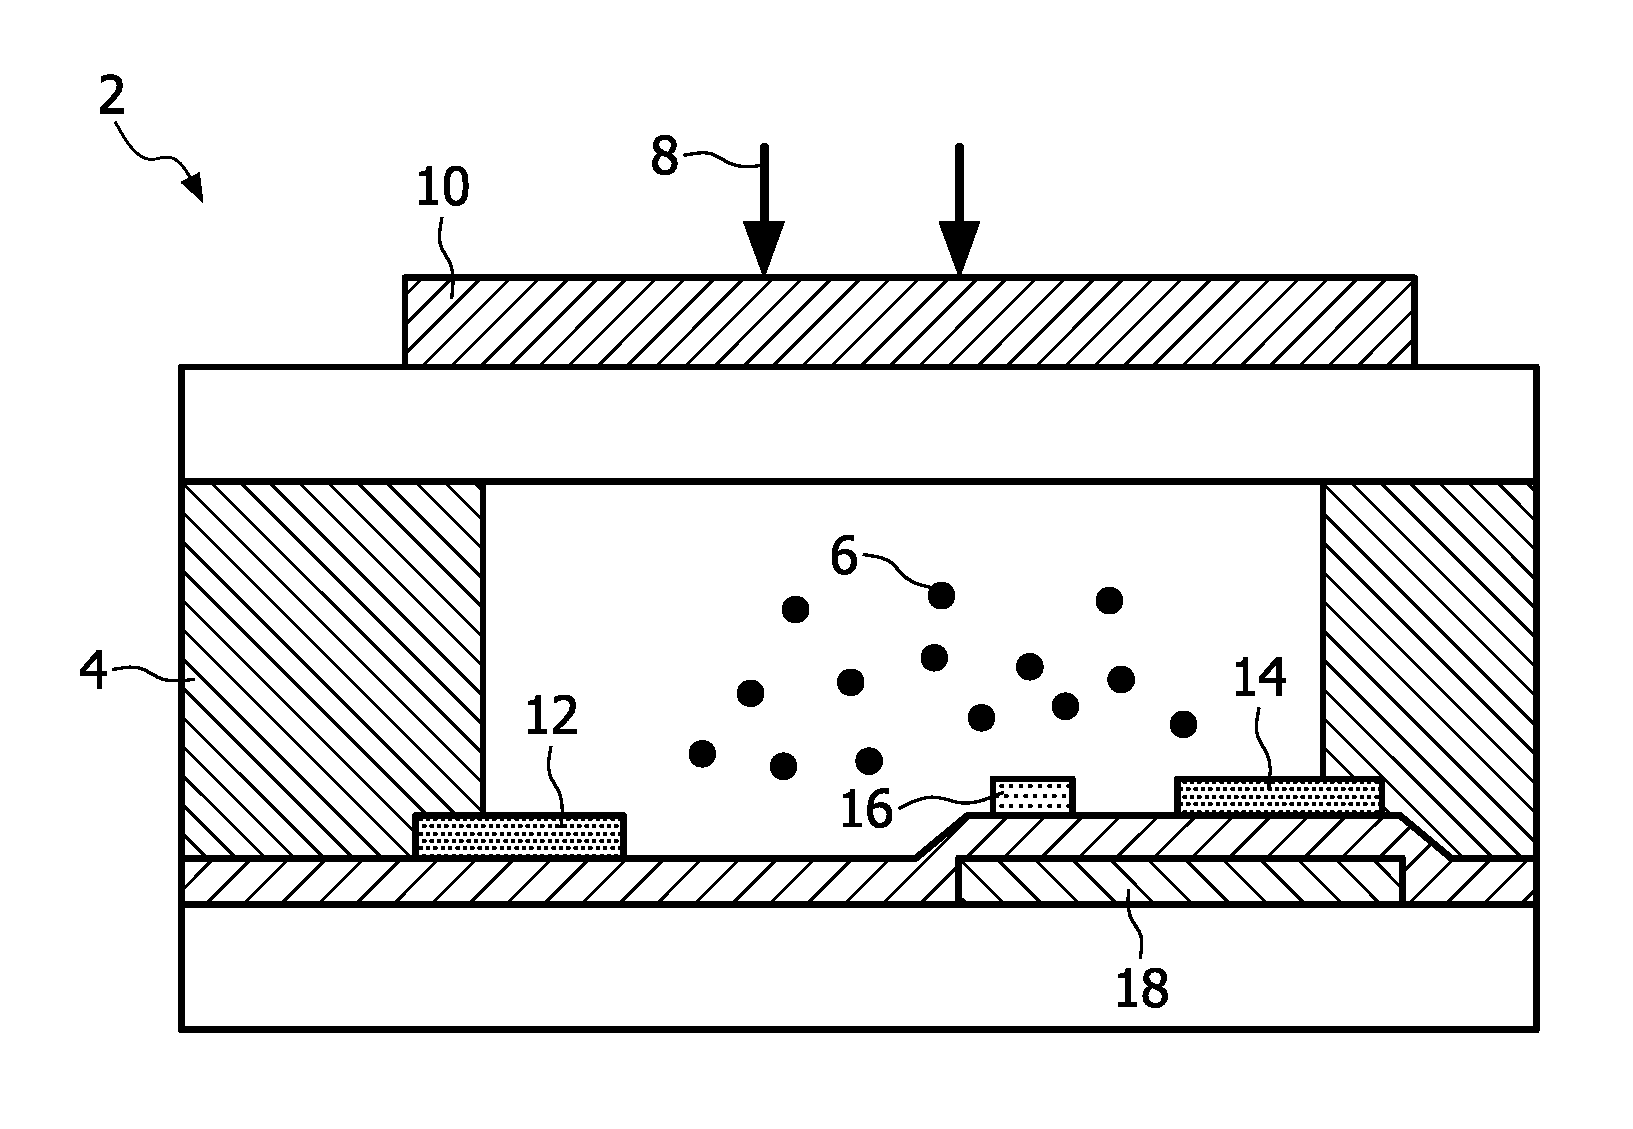 Electronic device using movement of particles